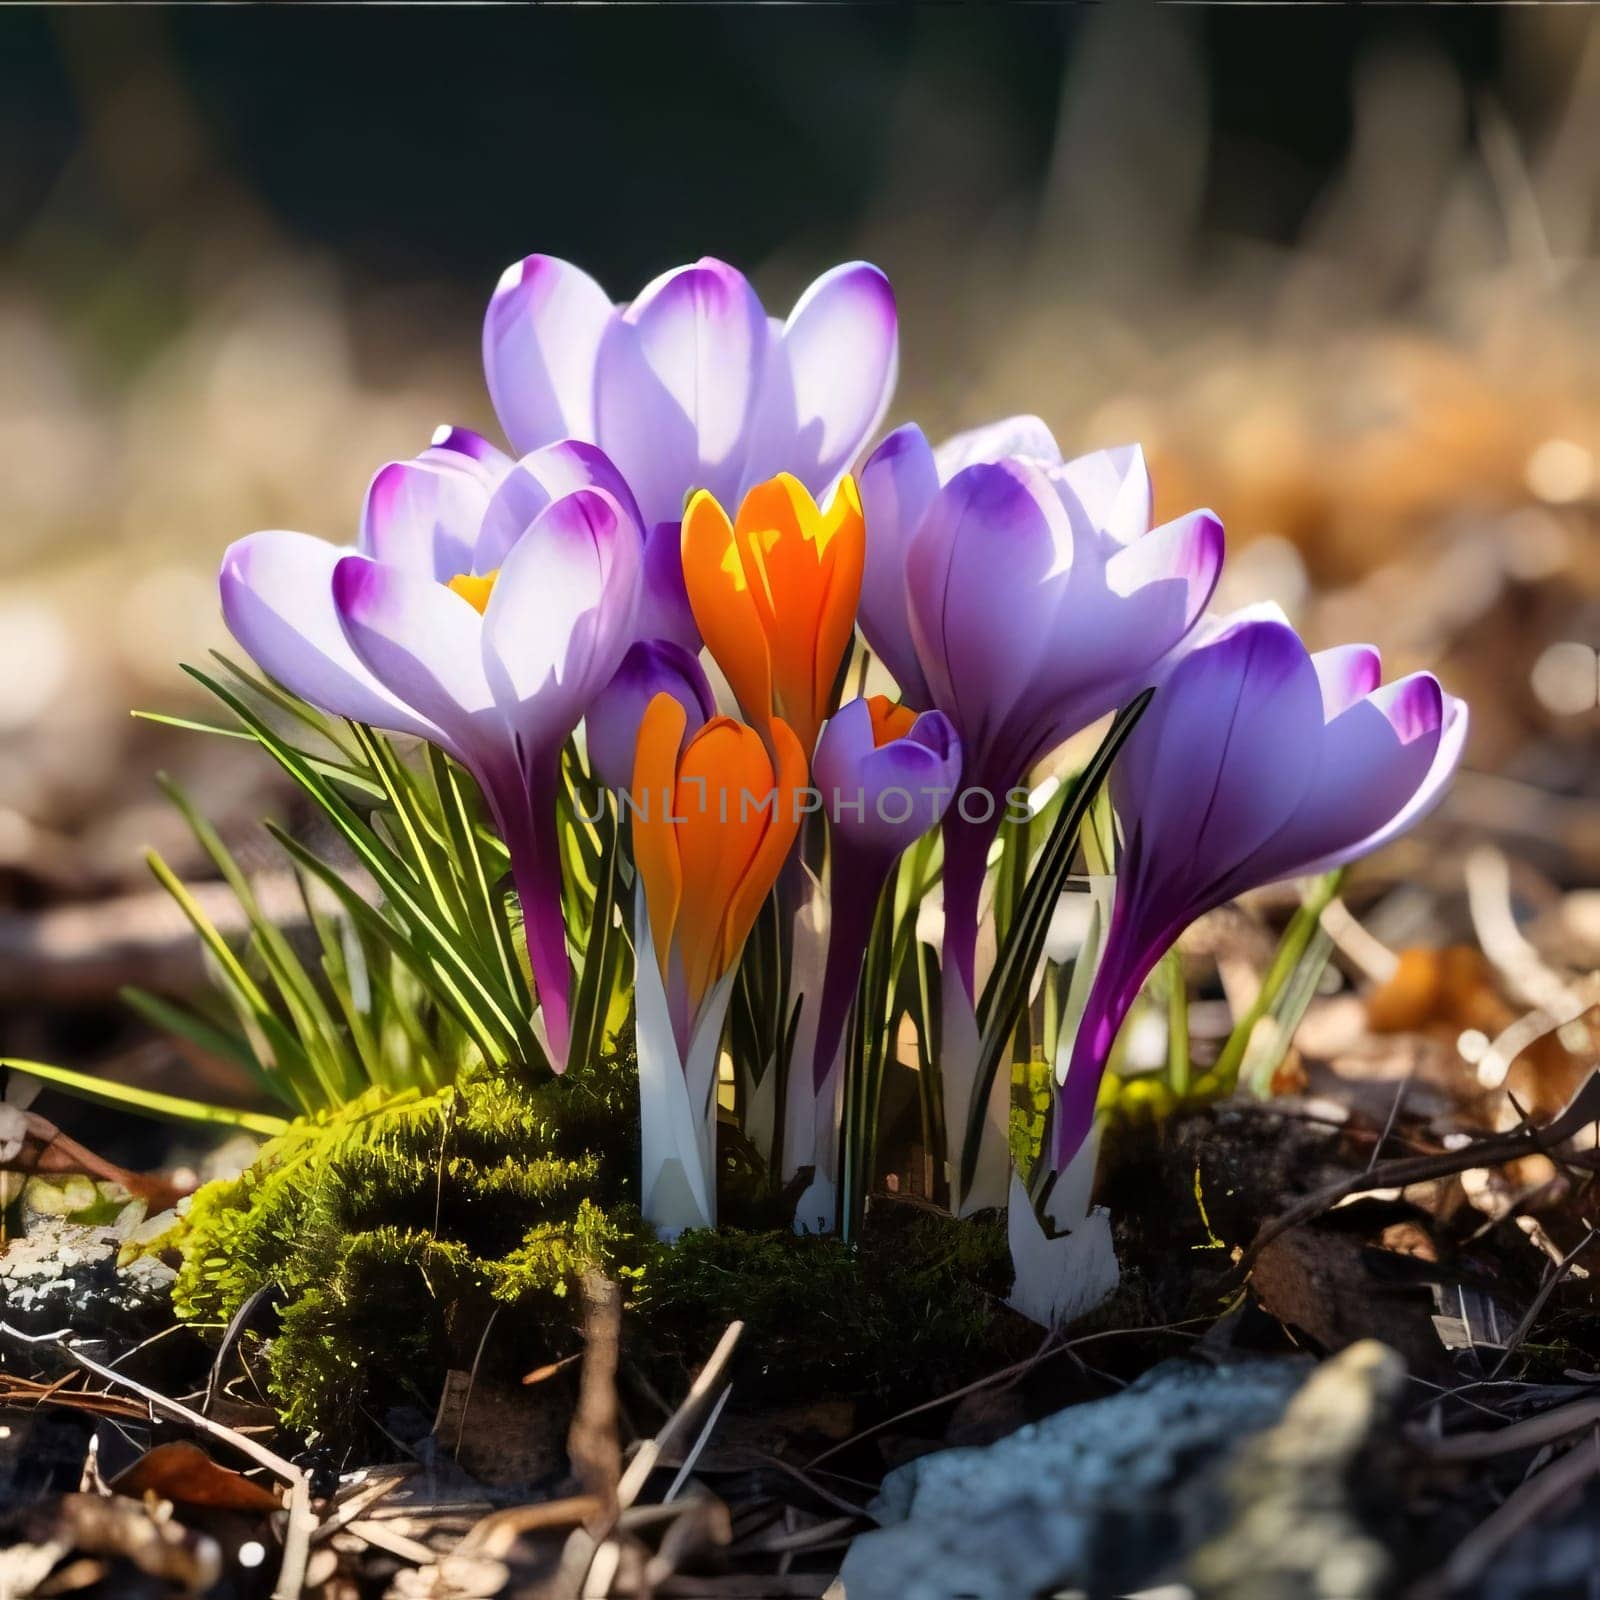 Purple crocuses growing in the middle of the moss in the sunlight. Flowering flowers, a symbol of spring, new life. A joyful time of nature waking up to life.